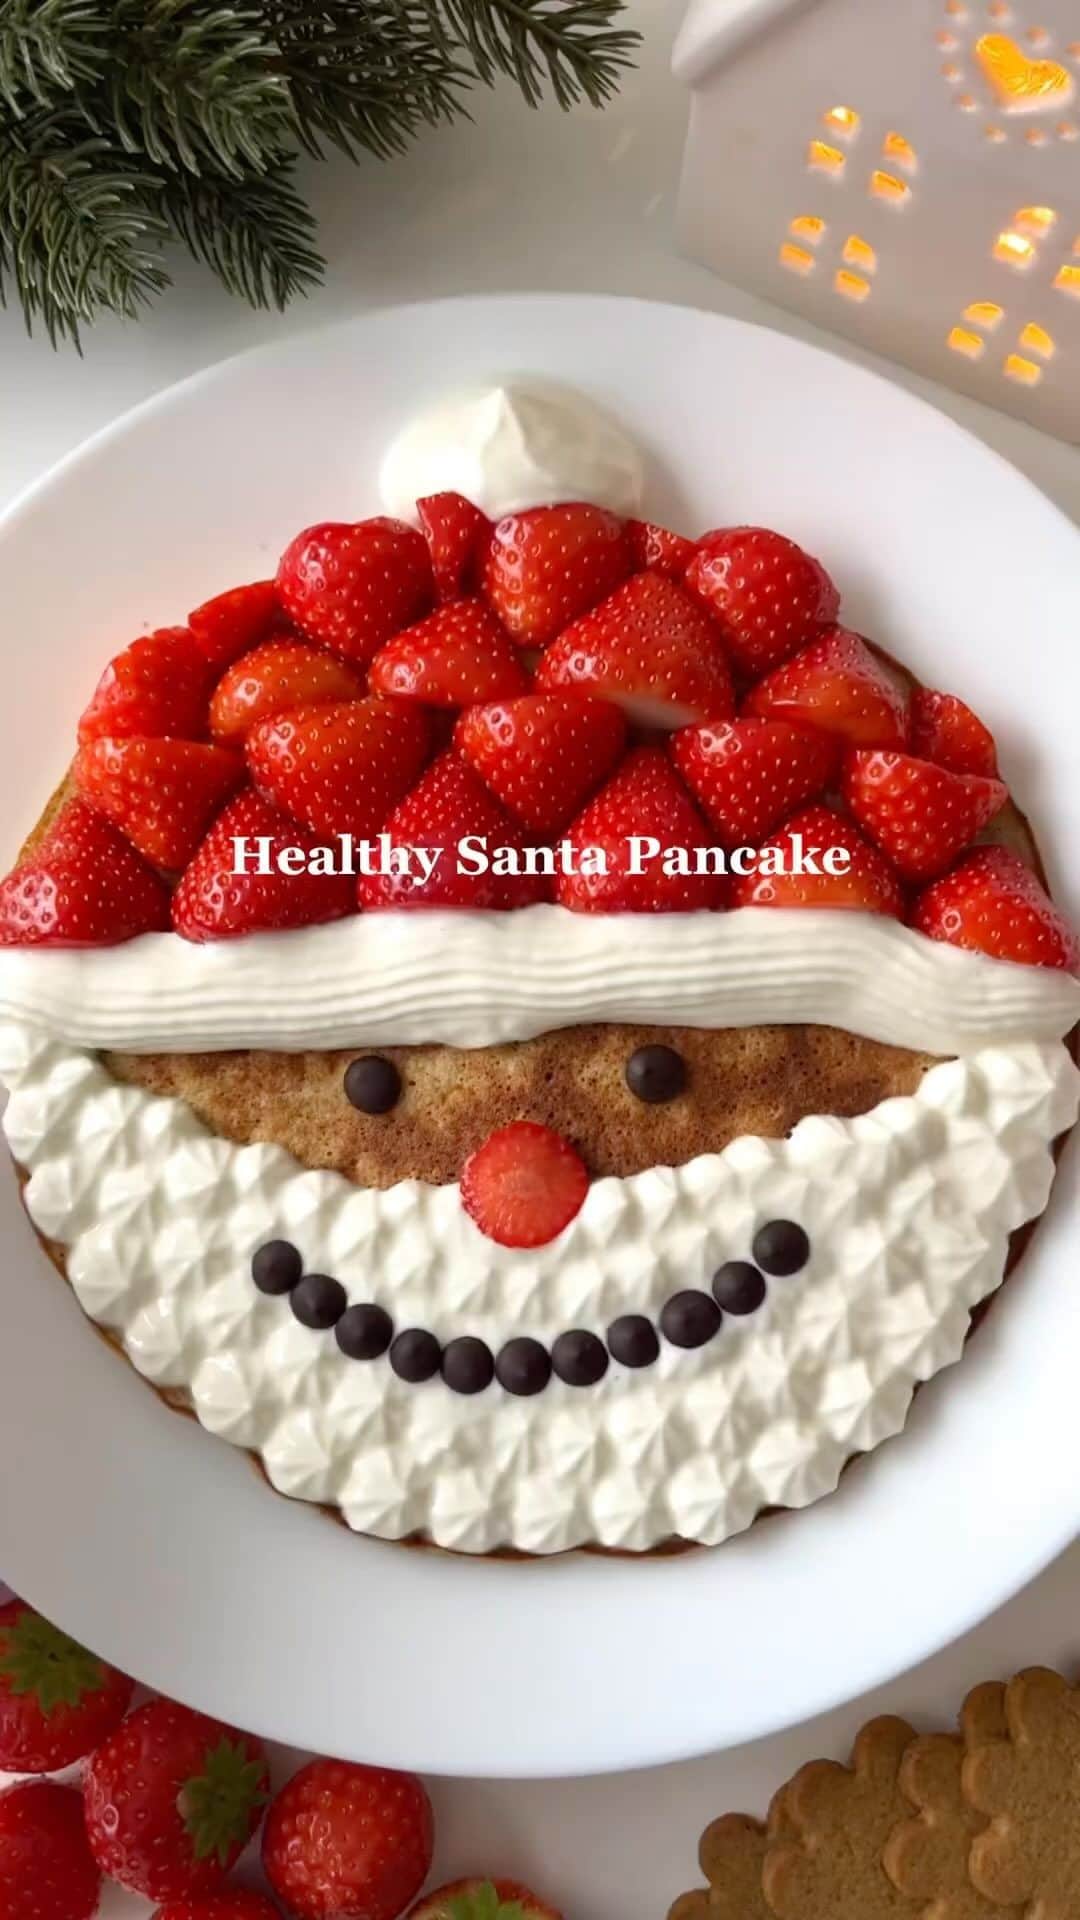 Sharing Healthy Snack Ideasのインスタグラム：「Healthy Santa Pancake🎅🏻 This is such a fun and yummy breakfast idea for the holiday season!🎄 The recipe is gluten-free & lactose-free☺️ by • @fitfoodieselma • For the pancake: 1 mashed banana 2 eggs 1/3 cup gluten-free oat flour (80 ml) 1 teaspoon cinnamon • Toppings: 1/2 cup lactose-free Greek yogurt (120 ml) about 10 strawberries cut in half 1 tablespoon dark chocolate chips • 1. Mix the mashed banana with the eggs 2. Add the flour and cinnamon and stir until smooth 3. Cook on a non-stick skillet for about 5 minutes on each side 4. Let cool down for a couple of minutes 5. Make a hat of strawberries, then brim, pompom and beard of the yogurt, eyes and mouth of dark chocolate chips and a nose of a strawberry slice 6. Enjoy! • • ❤️Follow for more easy recipes! • • • #healthybreakfast #healthybreakfastideas #healthybreakfastrecipes #glutenfreepancakes #glutenfreebreakfast #healthyrecipesforkids #healthypancakes #healthypancake #christmasbreakfast」